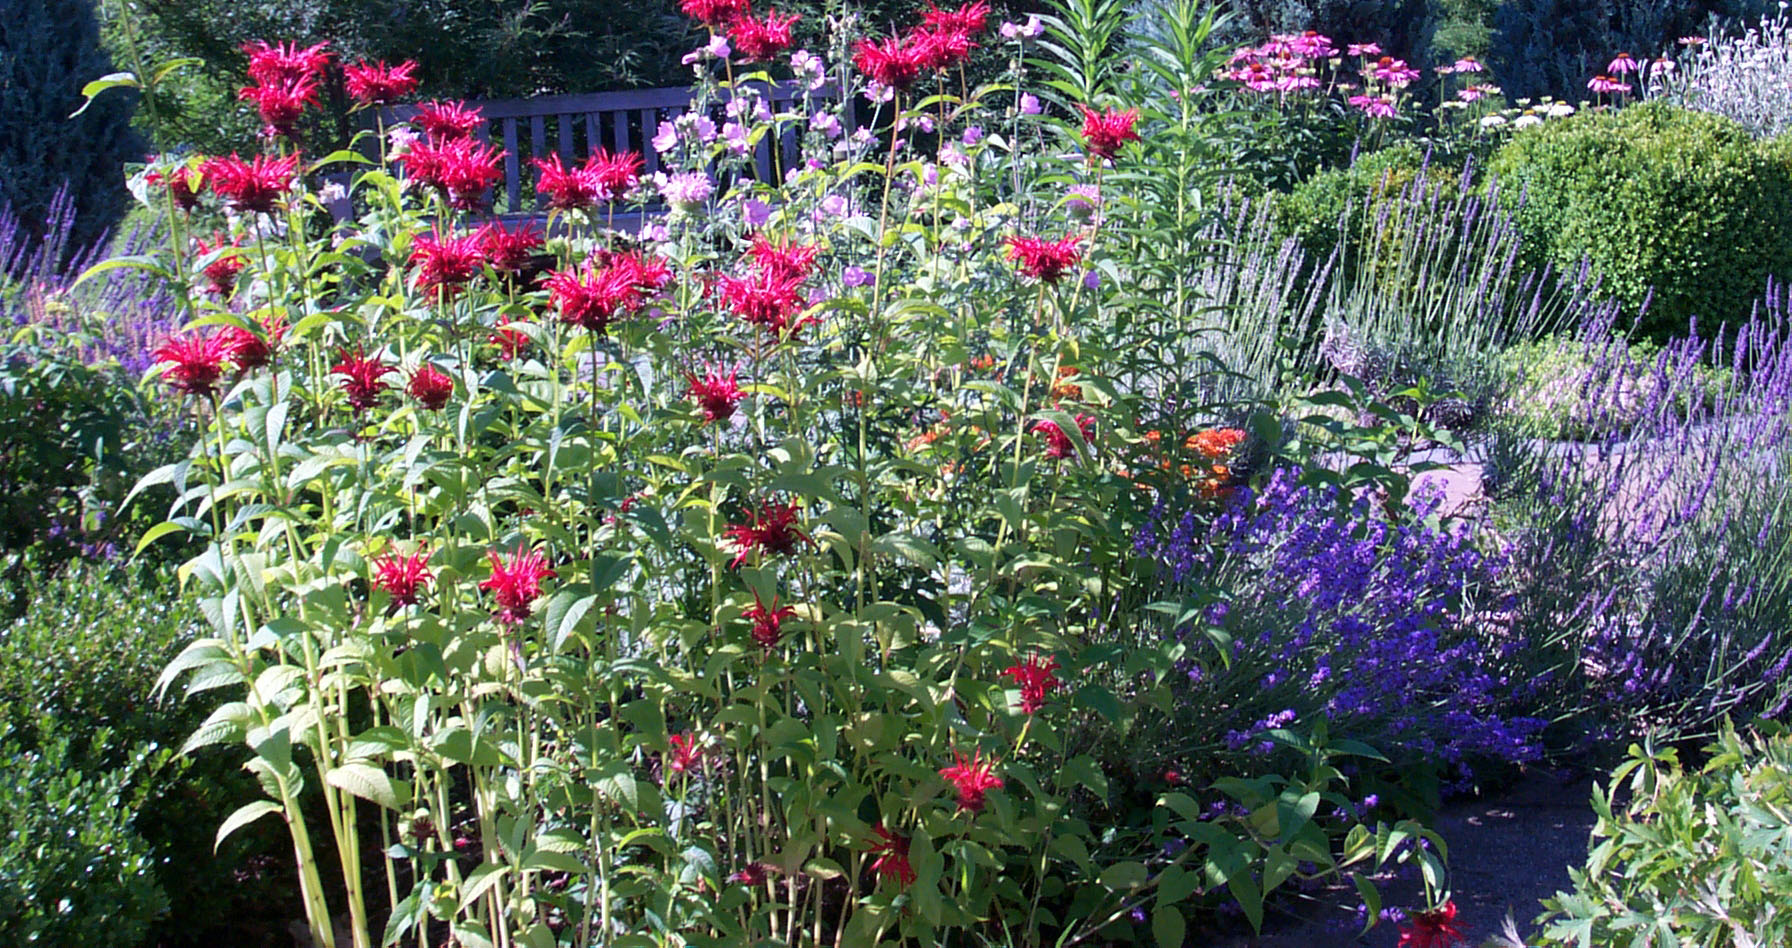 A flower garden with a variety of pink, red, white, purple and lavender flowers.